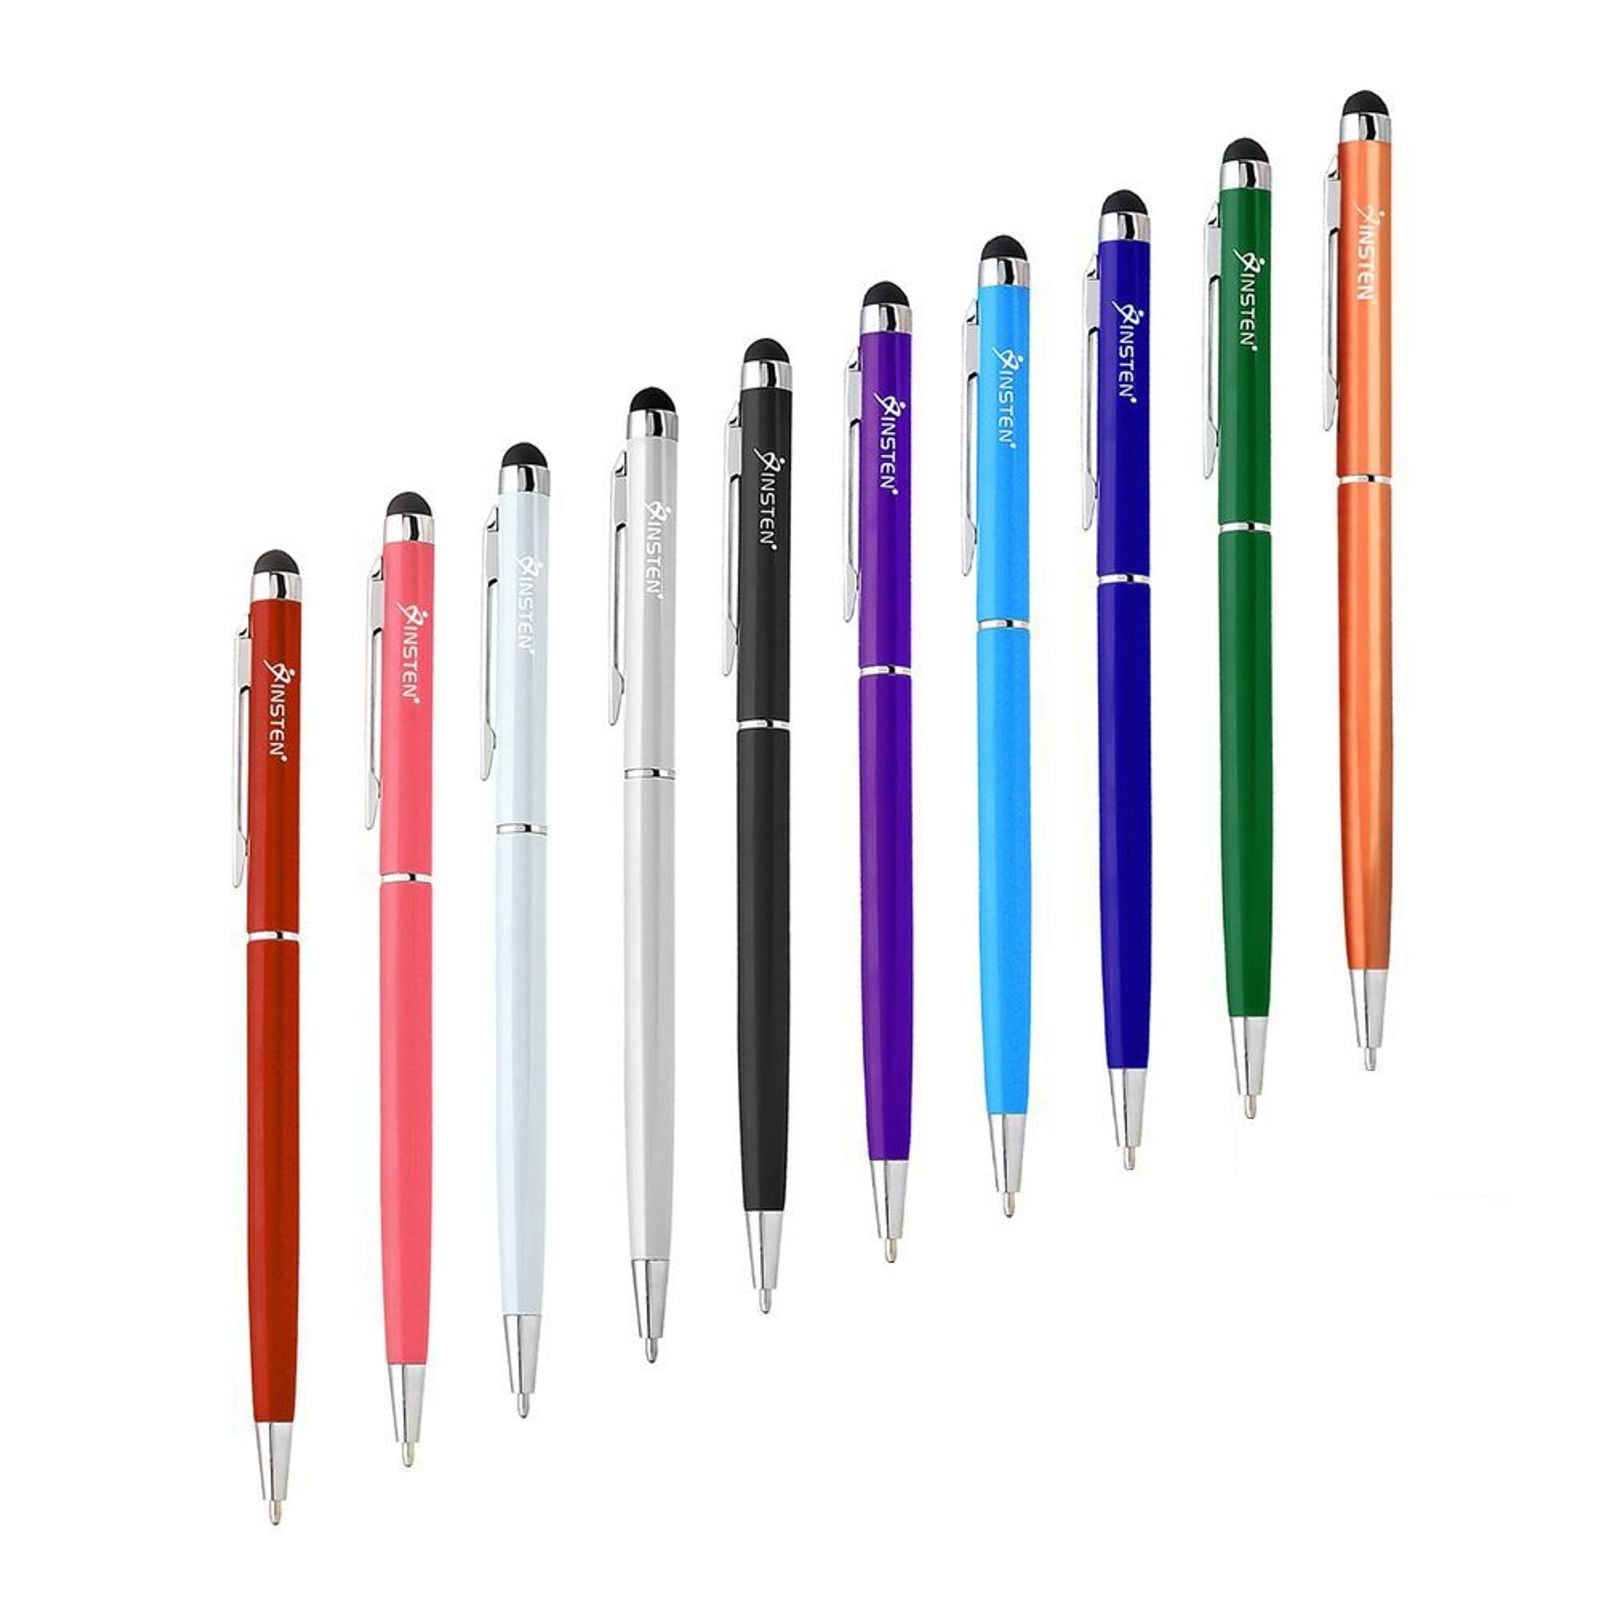 2in1 Capacitive Touch Screen Stylus Ballpoint Pen For iPhone Samsung Tablet New 